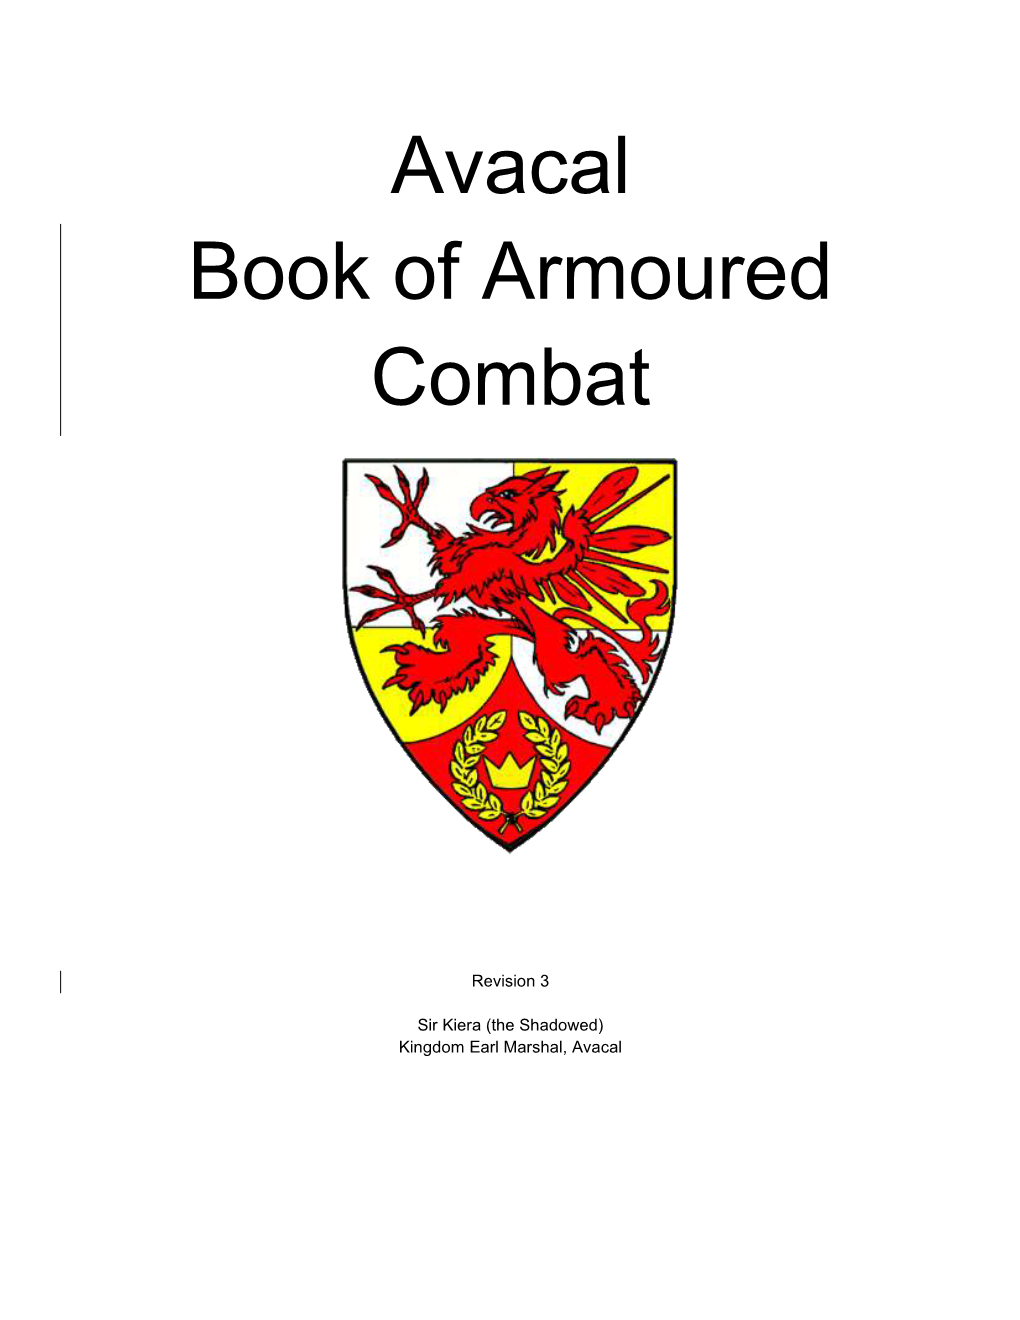 Kingdom of Avacal Book of Armoured Combat Rev 3 Revised 2020-08-01